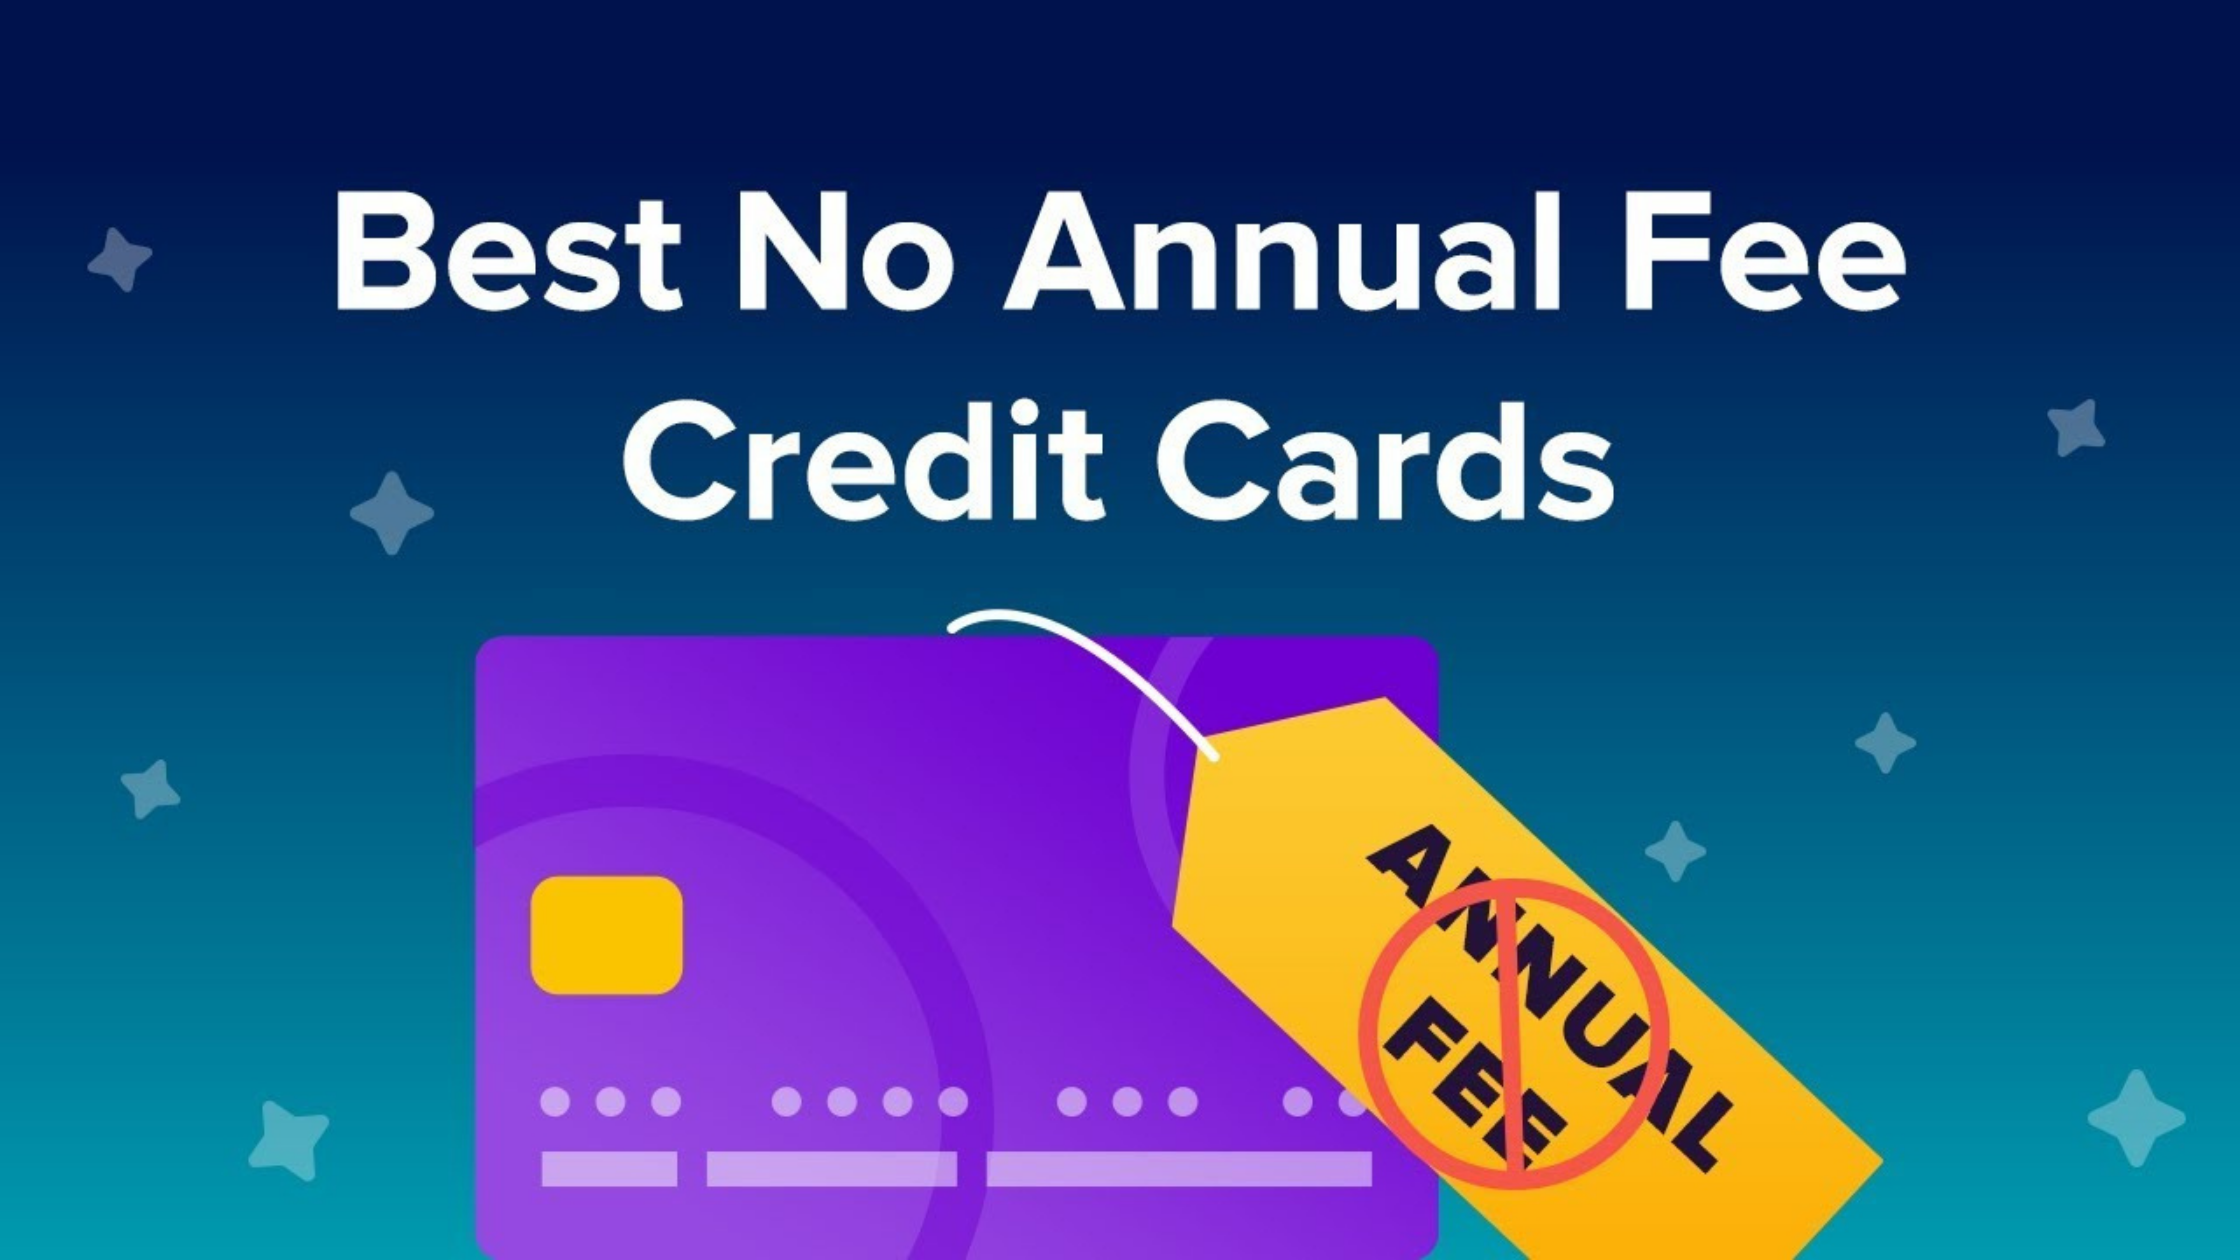 Best No-Fee Credit Card Recommendations for This Holiday Season